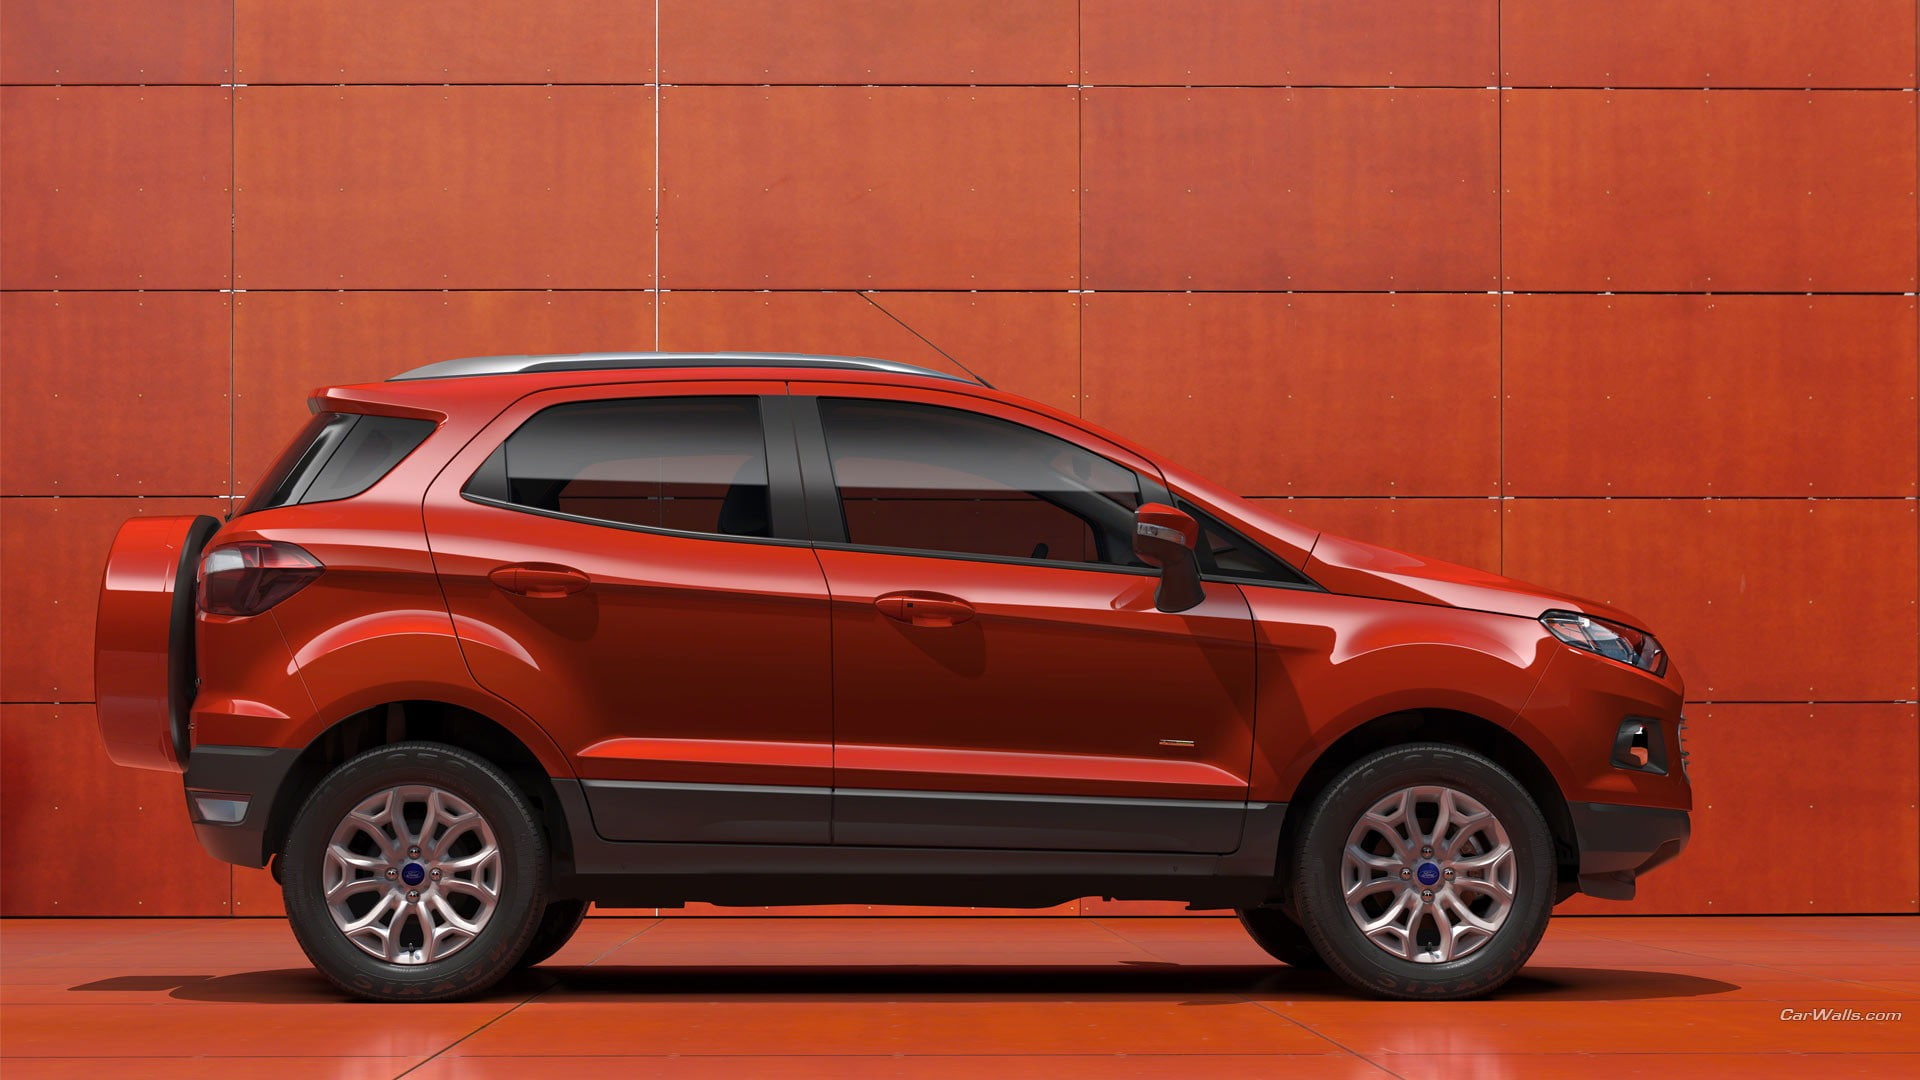 Ford EcoSport, red cars, vehicle, motor vehicle, mode of transportation